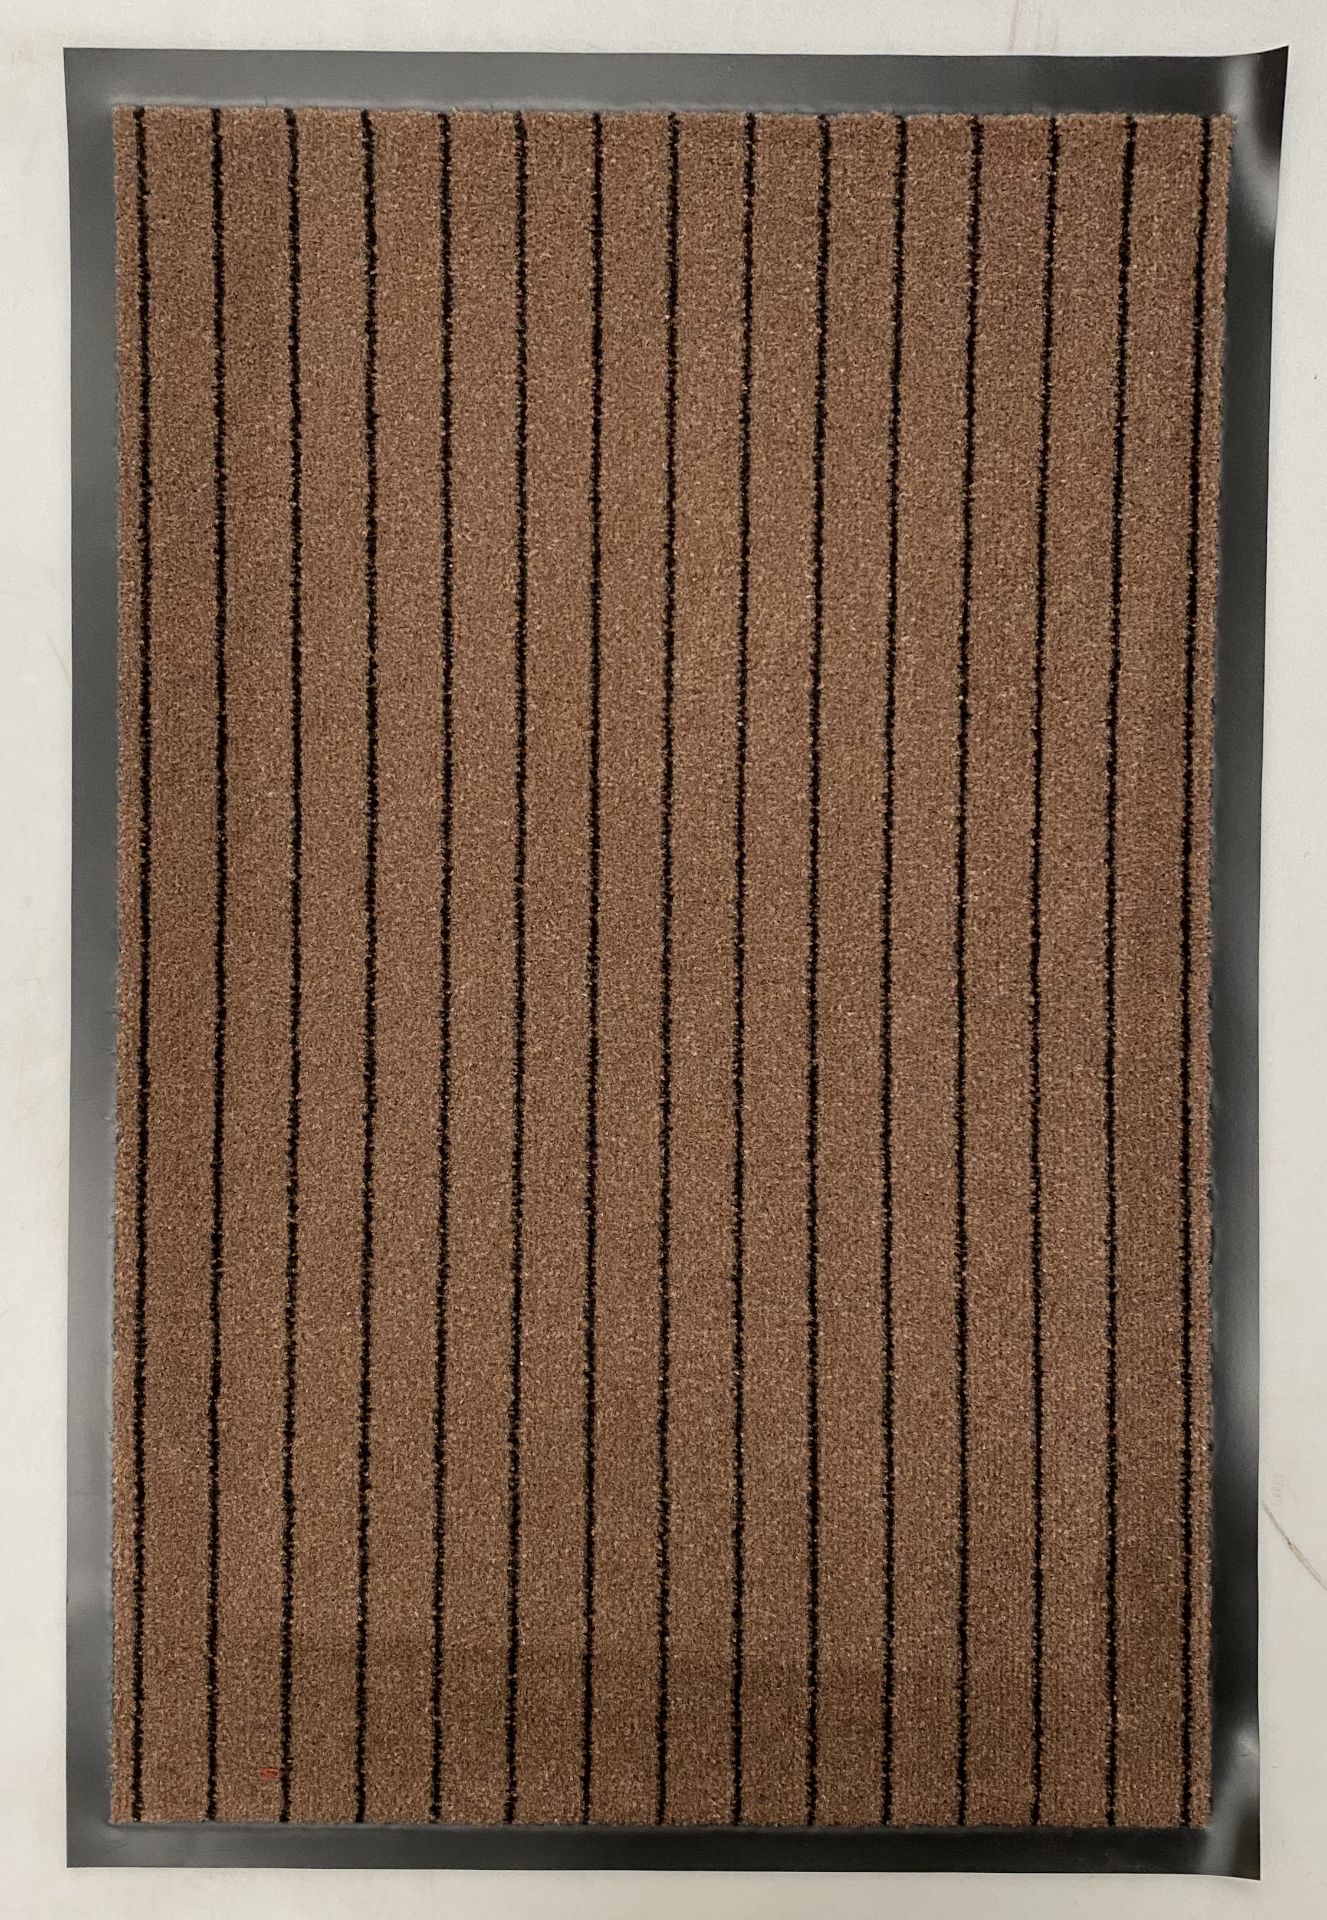 5 x Brown and black striped barrier mats - 90cm x 60cm